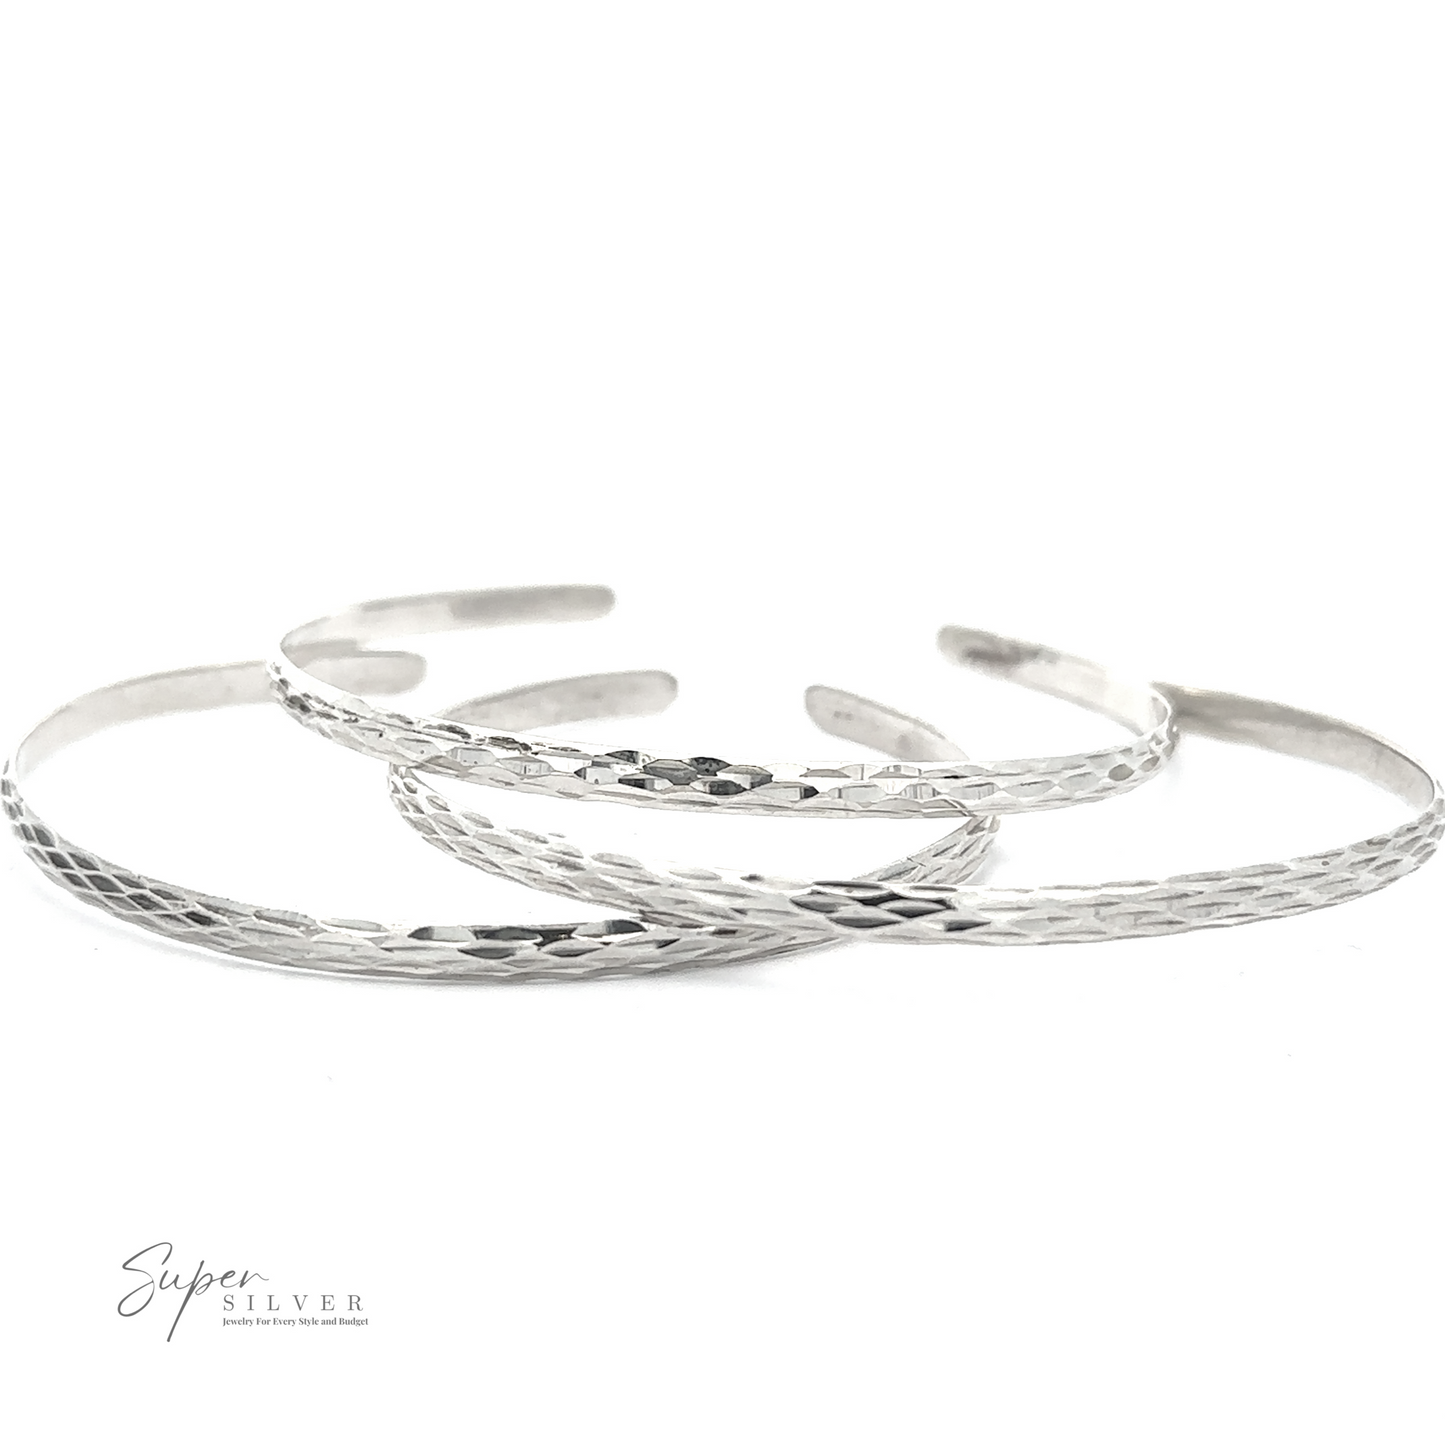 
                  
                    Three overlapping, thin, sterling silver bracelets with a textured pattern. The logo “Glittering Diamond Cut Cuff Bracelet” is displayed in the bottom left corner. These minimalist bracelets offer a subtle elegance perfect for any occasion.
                  
                